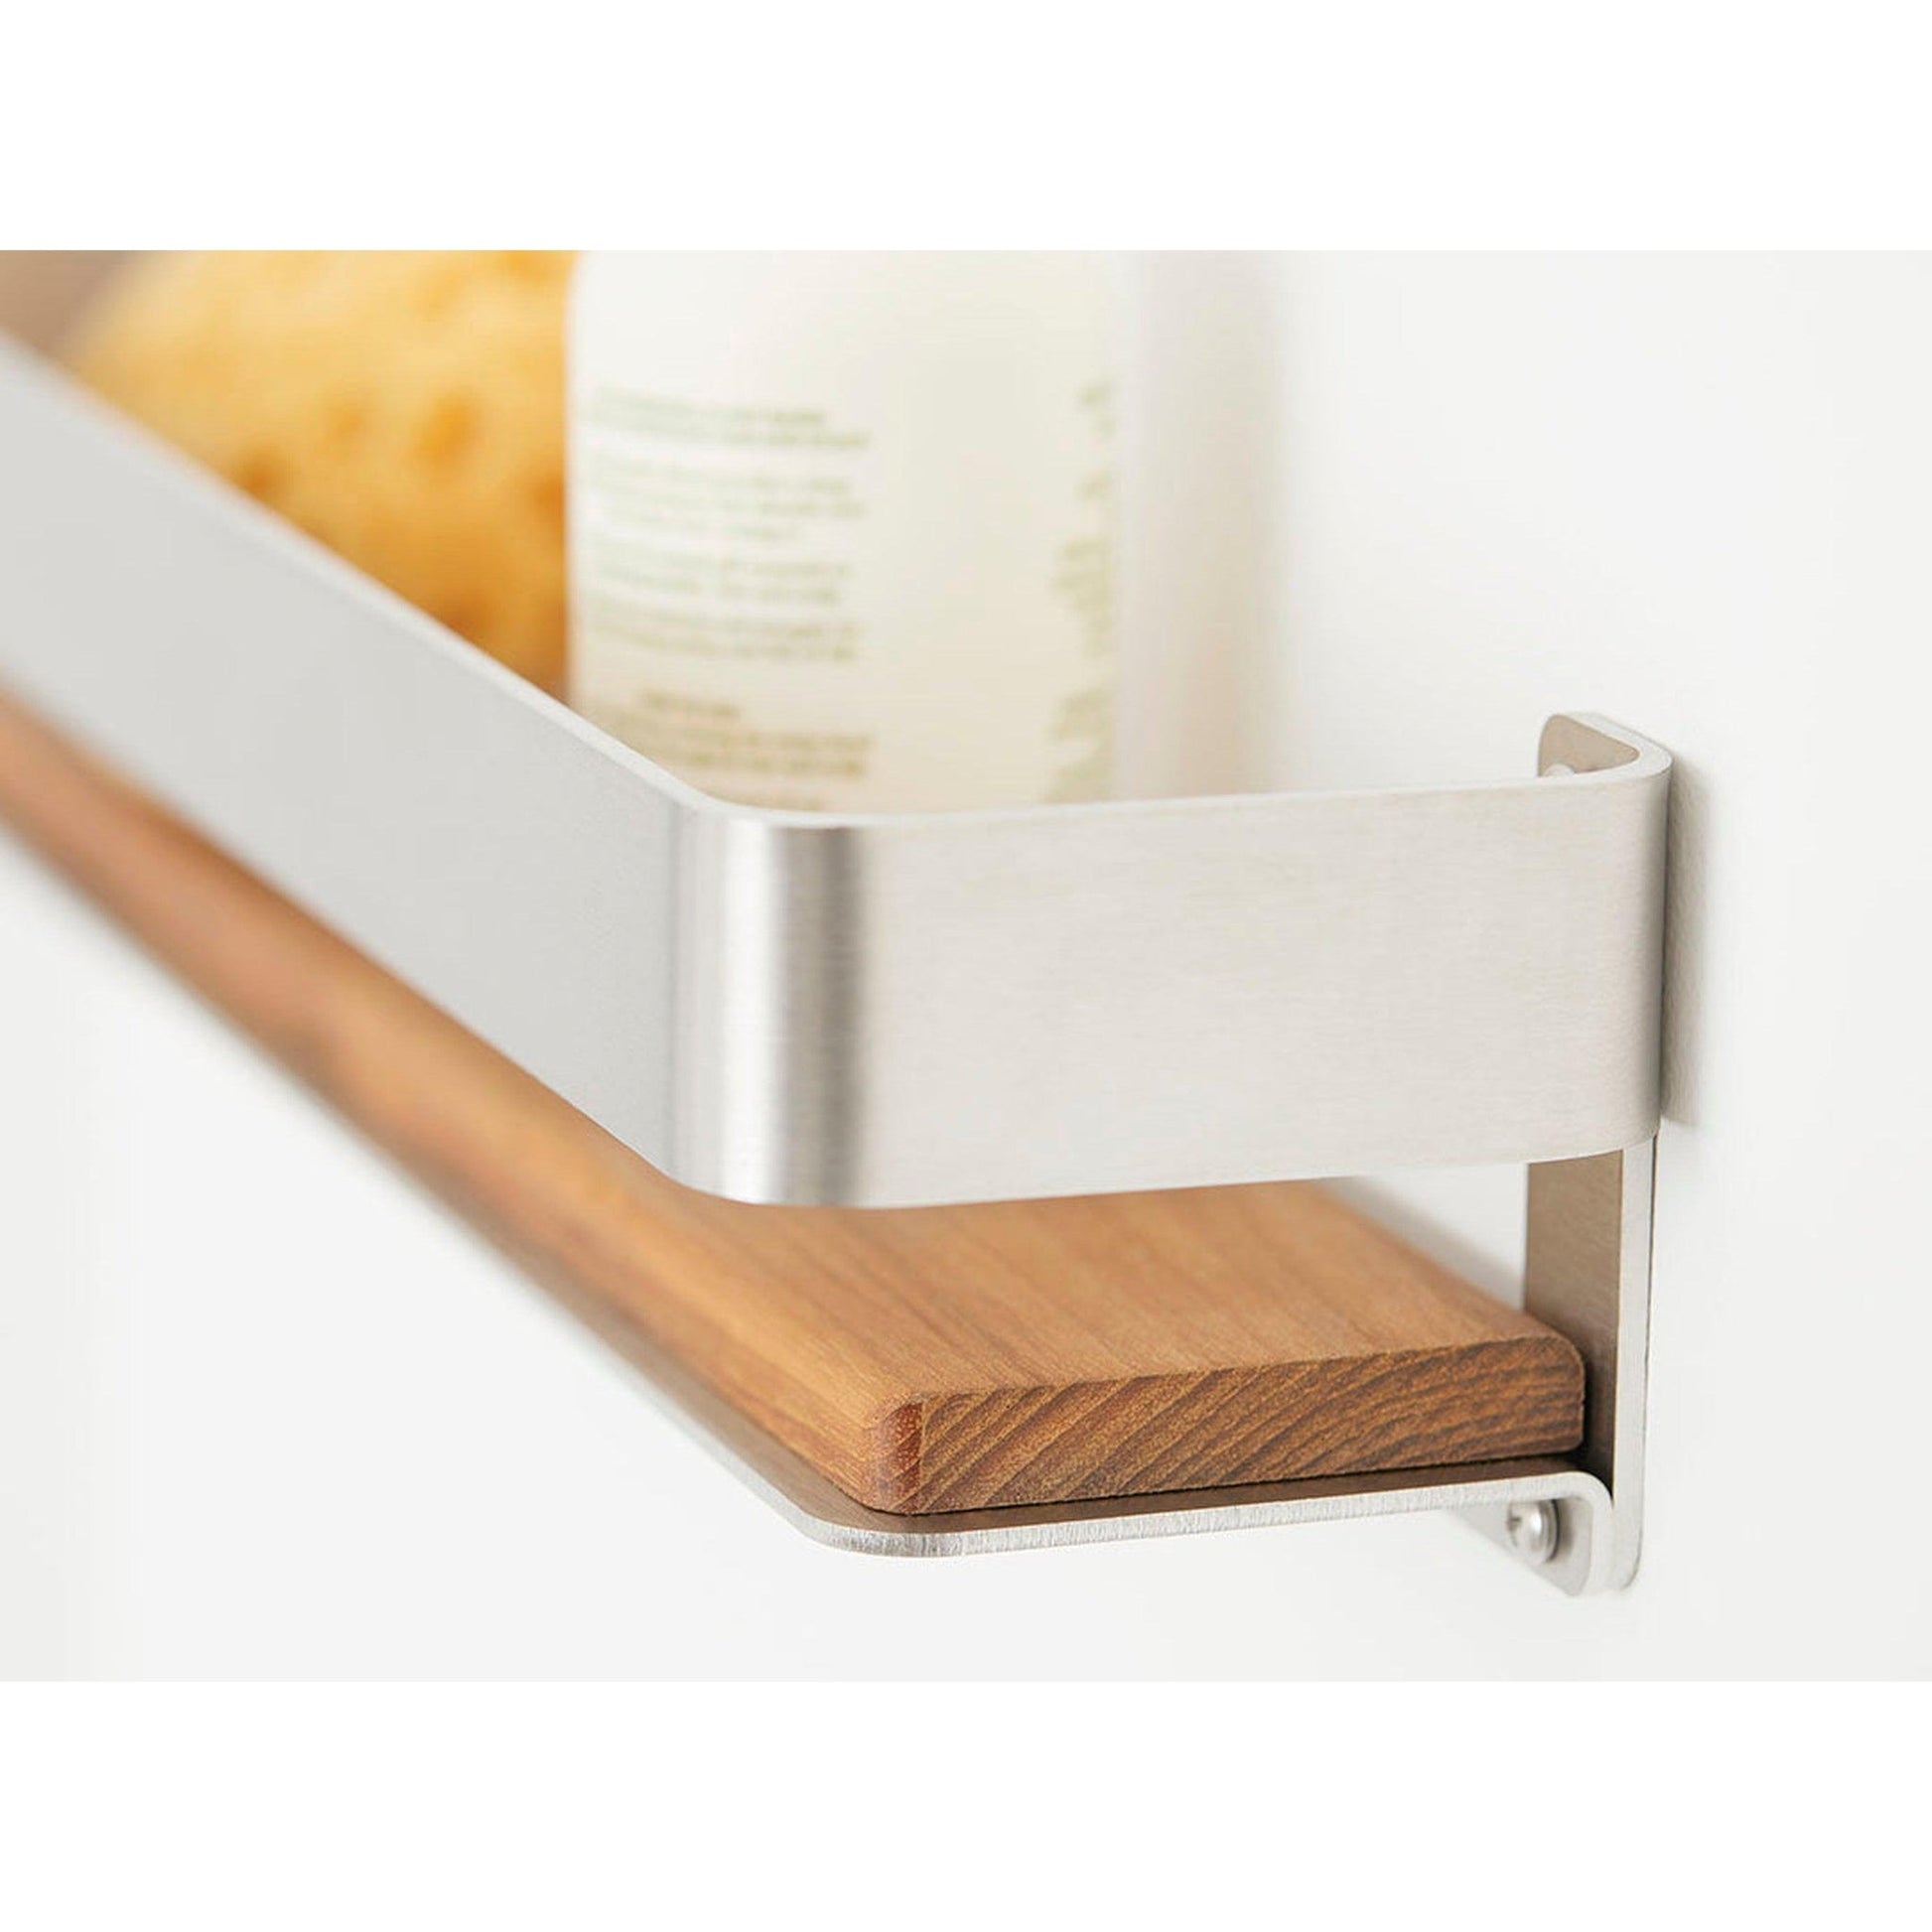 The Teak And Stainless Steel Shower Organizer